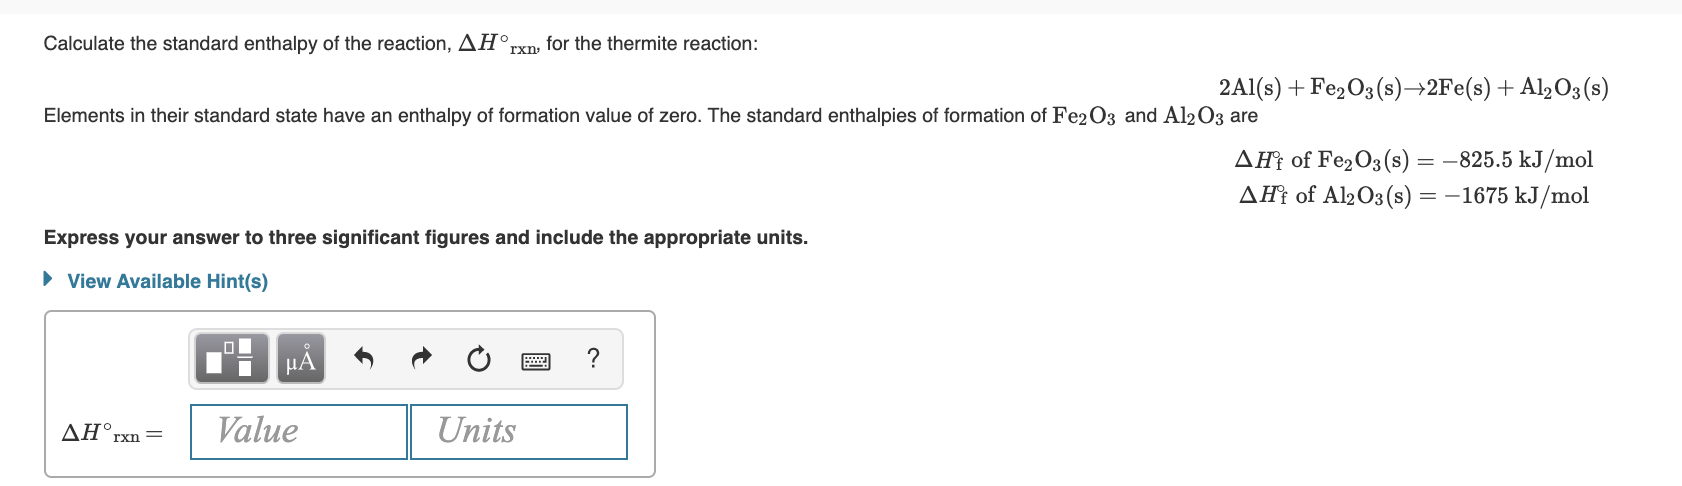 standard enthalpy of the reaction, AH°,
Calculate the
rxn, for the thermite reaction:
2Al(s) + Fe2O3 (s)→2F€(s) + Al½O3(s)
Elements in their standard state have an enthalpy of formation value of zero. The standard enthalpies of formation of Fe2O3 and Al203 are
AĦ† of Fe2O3 (s) = -825.5 kJ/mol
AĦt of Al2O3(s) = –1675 kJ/mol
Express your answer to three significant figures and include the appropriate units.
• View Available Hint(s)
НА
ΔΗ,
Value
Units
rxn =
